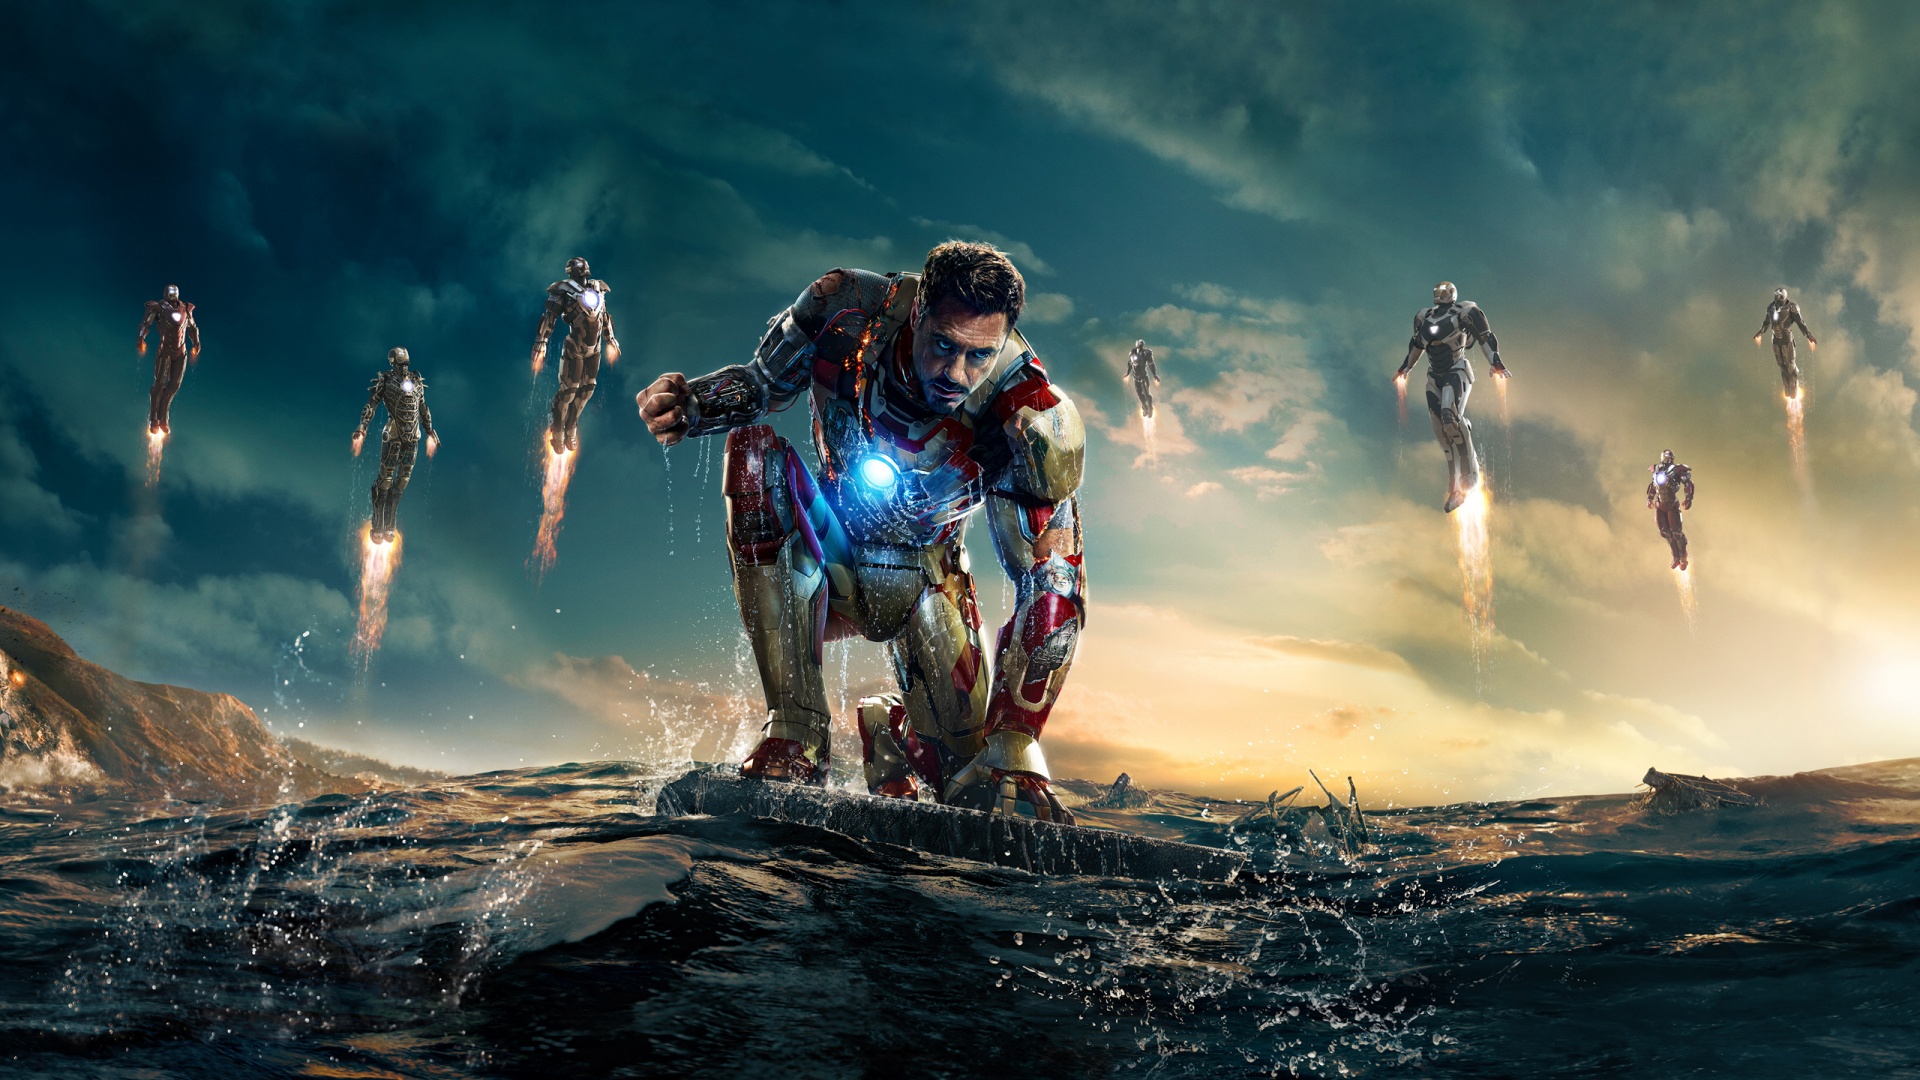 Free download Marvel Live action Movies image iron man 3 HD wallpaper and [1920x1080] for your Desktop, Mobile & Tablet. Explore Marvel Movies Wallpaper. Marvel Movies Wallpaper, Movies Wallpaper, Wallpaper Movies